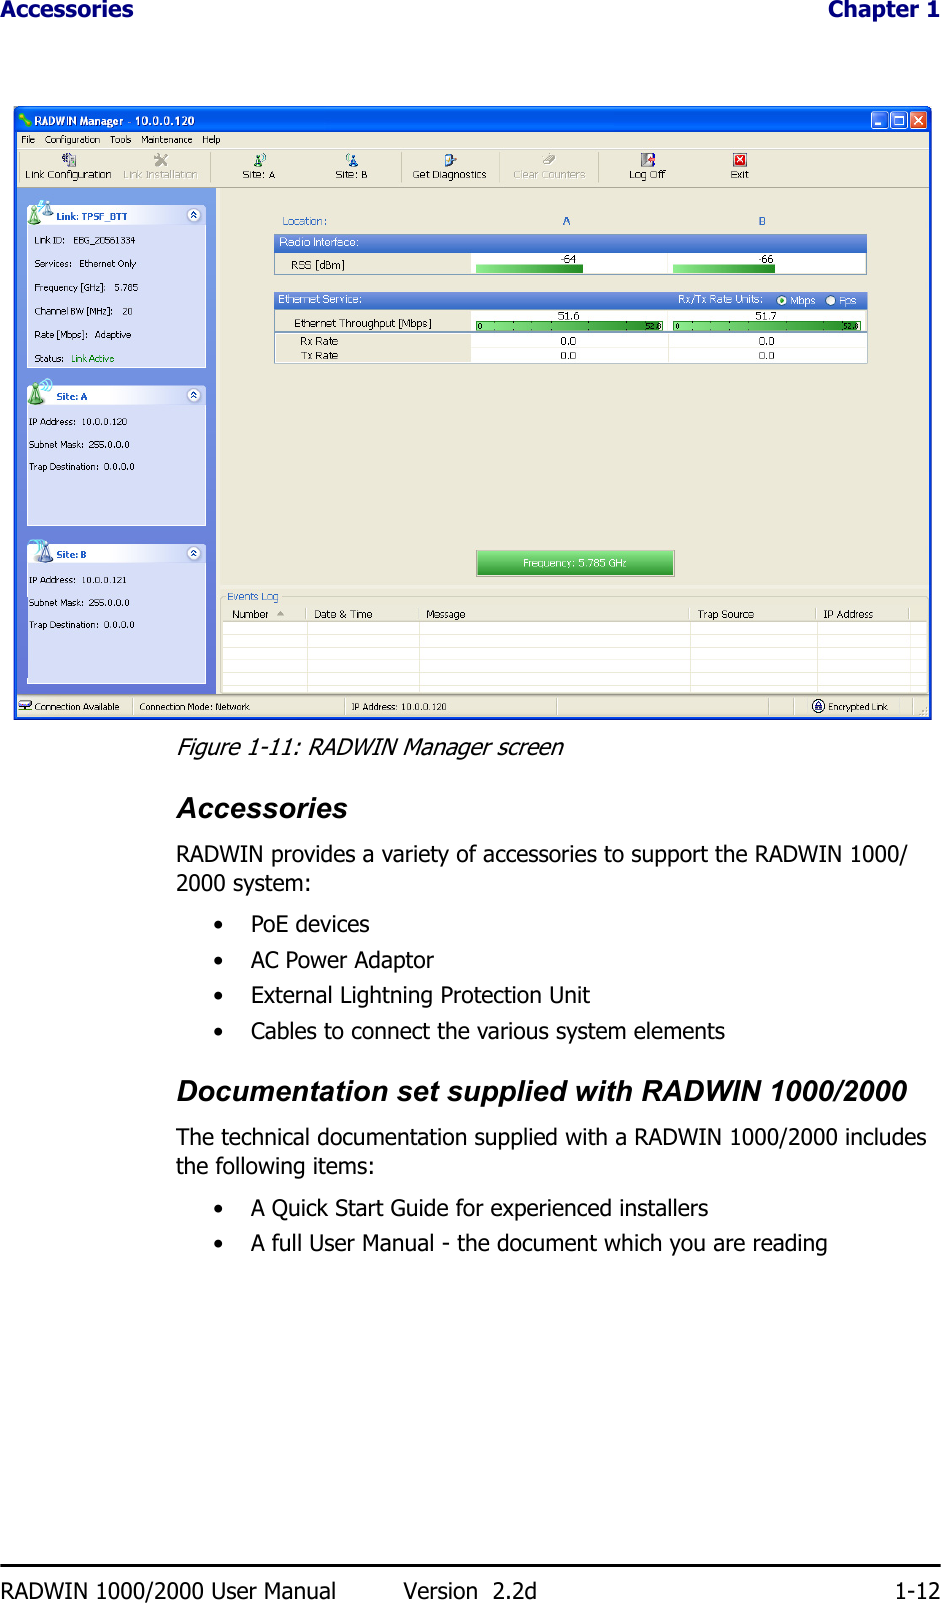 Accessories  Chapter 1RADWIN 1000/2000 User Manual Version  2.2d 1-12Figure 1-11: RADWIN Manager screenAccessoriesRADWIN provides a variety of accessories to support the RADWIN 1000/2000 system:•PoE devices•AC Power Adaptor• External Lightning Protection Unit• Cables to connect the various system elementsDocumentation set supplied with RADWIN 1000/2000The technical documentation supplied with a RADWIN 1000/2000 includes the following items:• A Quick Start Guide for experienced installers• A full User Manual - the document which you are reading